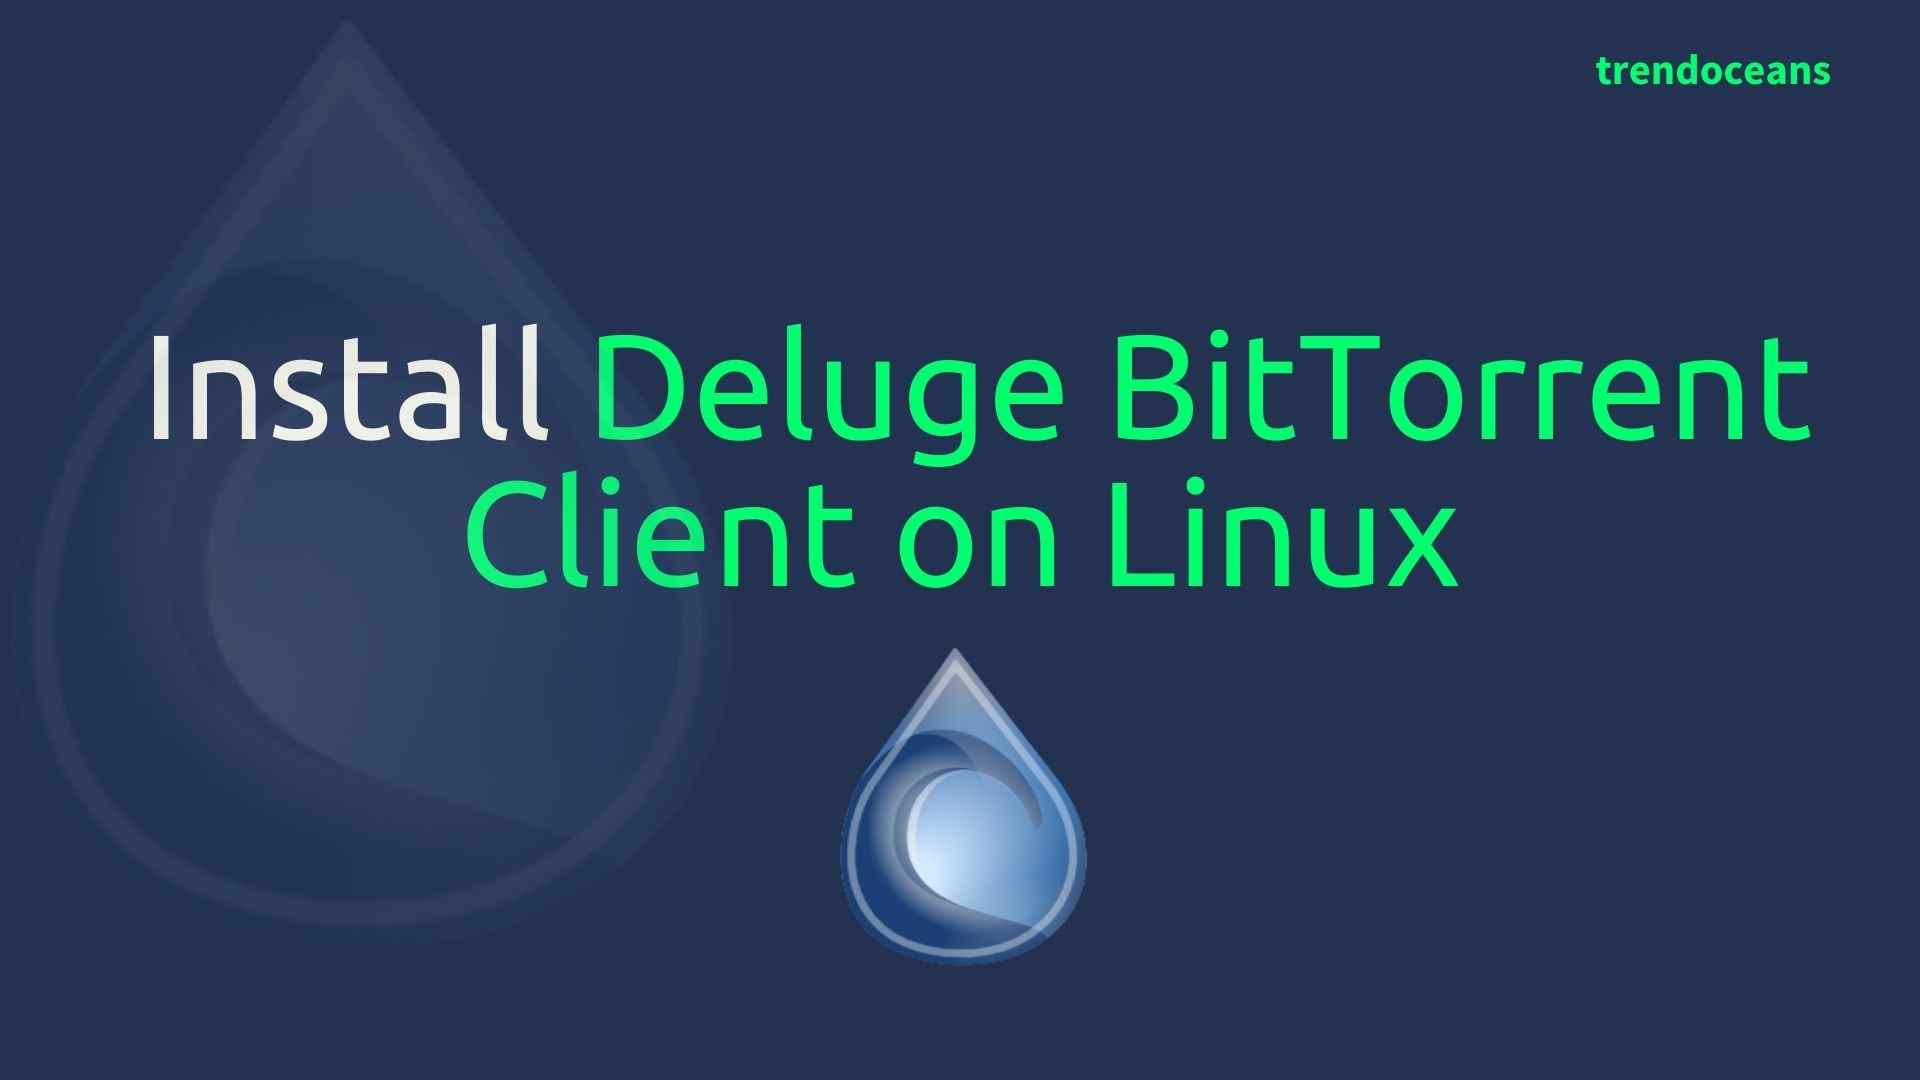 How to install the Latest Deluge BitTorrent Client on Linux